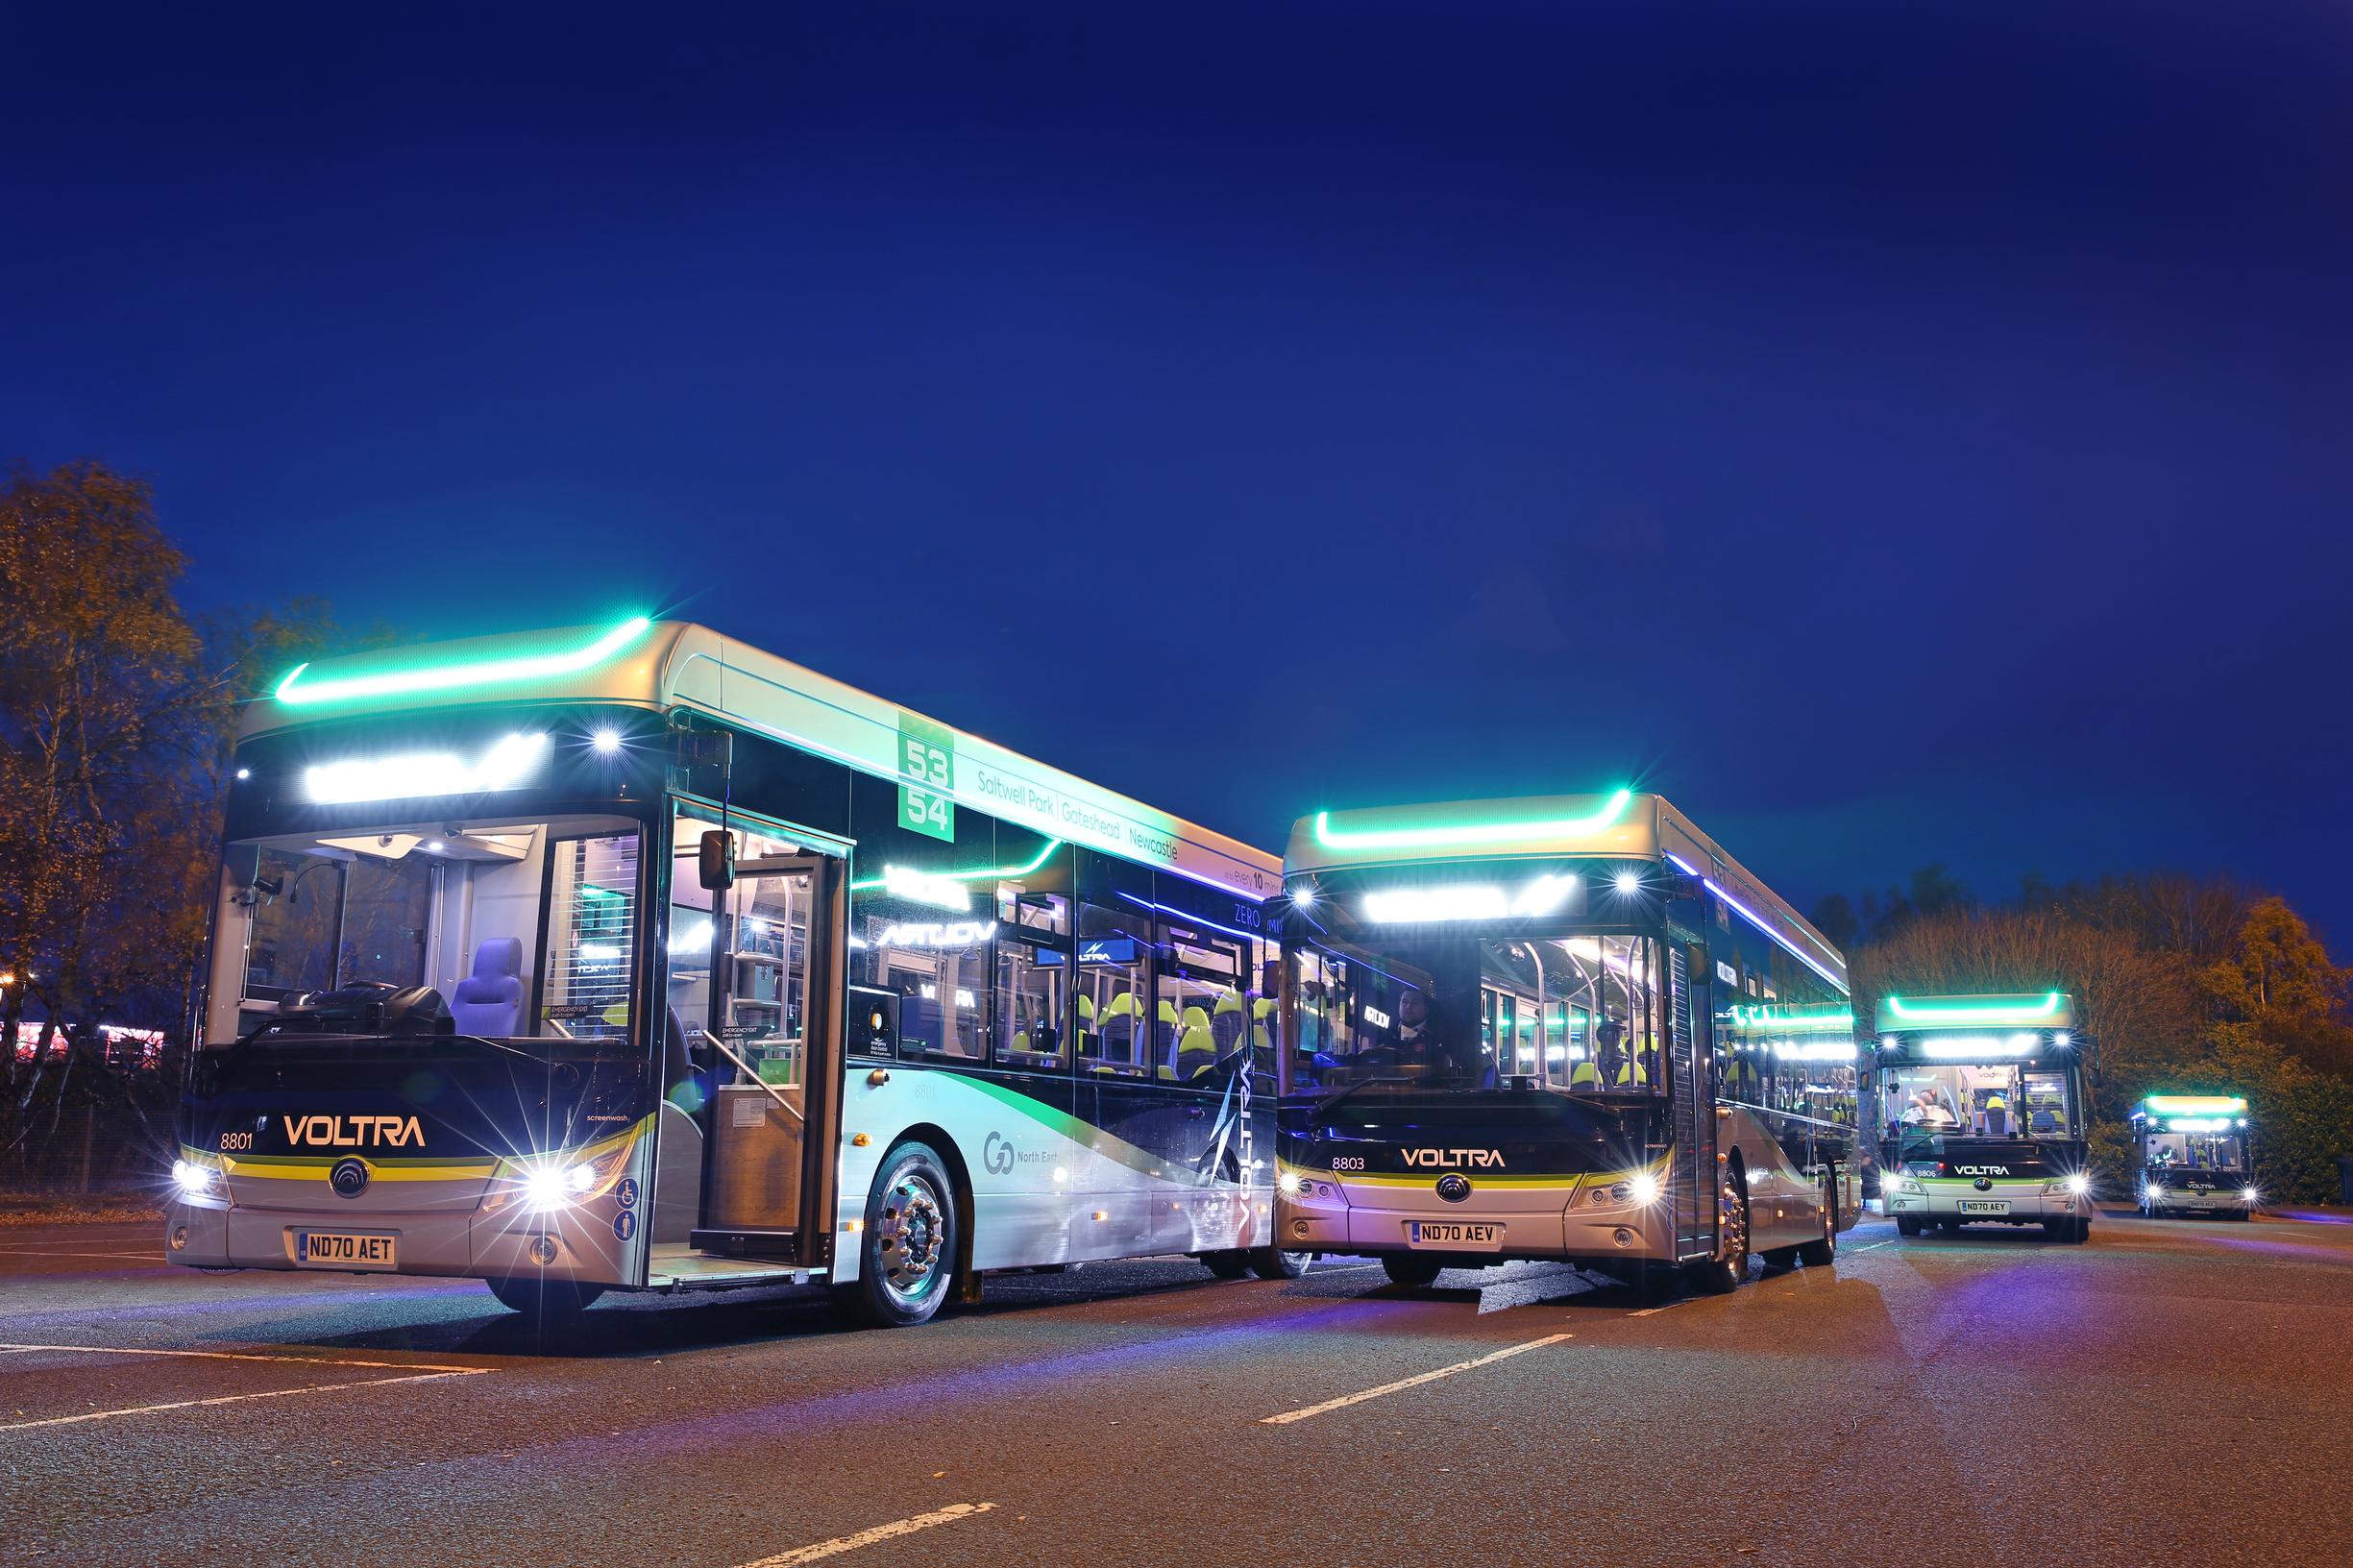 Go North East is operating Voltra, a fleet of nine buses linking Gateshead and Newcastle